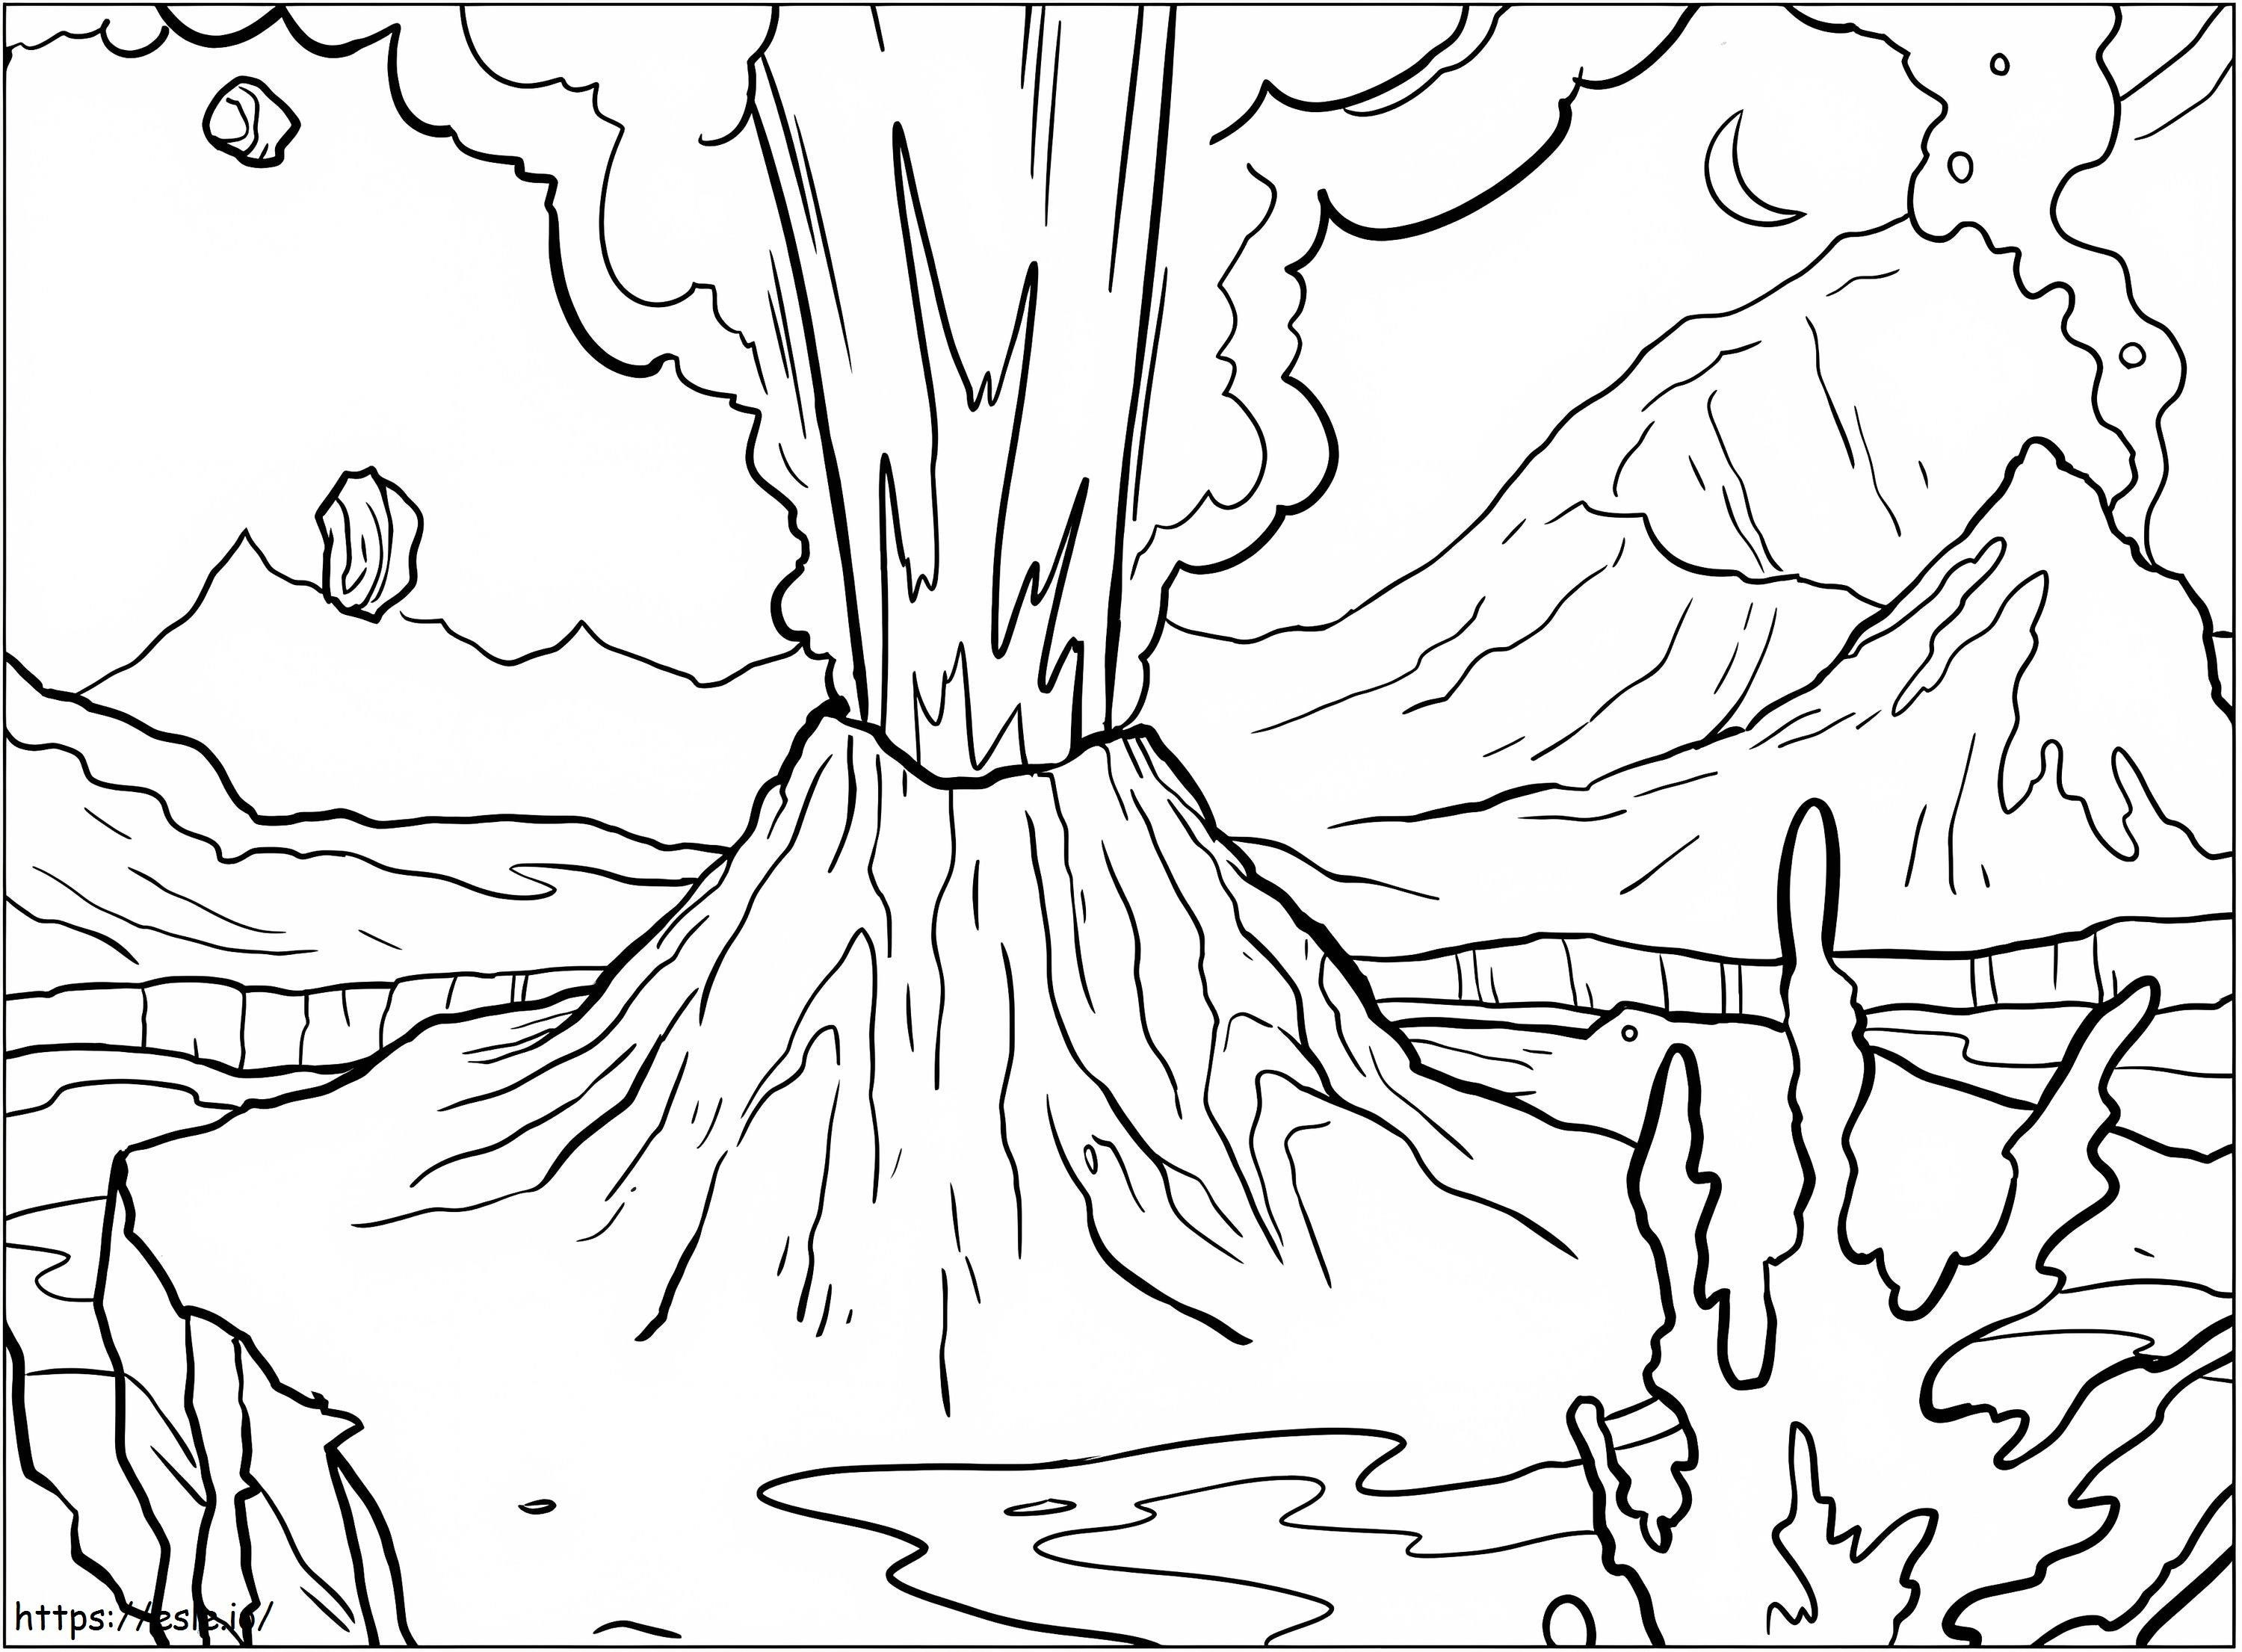 Volcano 5 coloring page